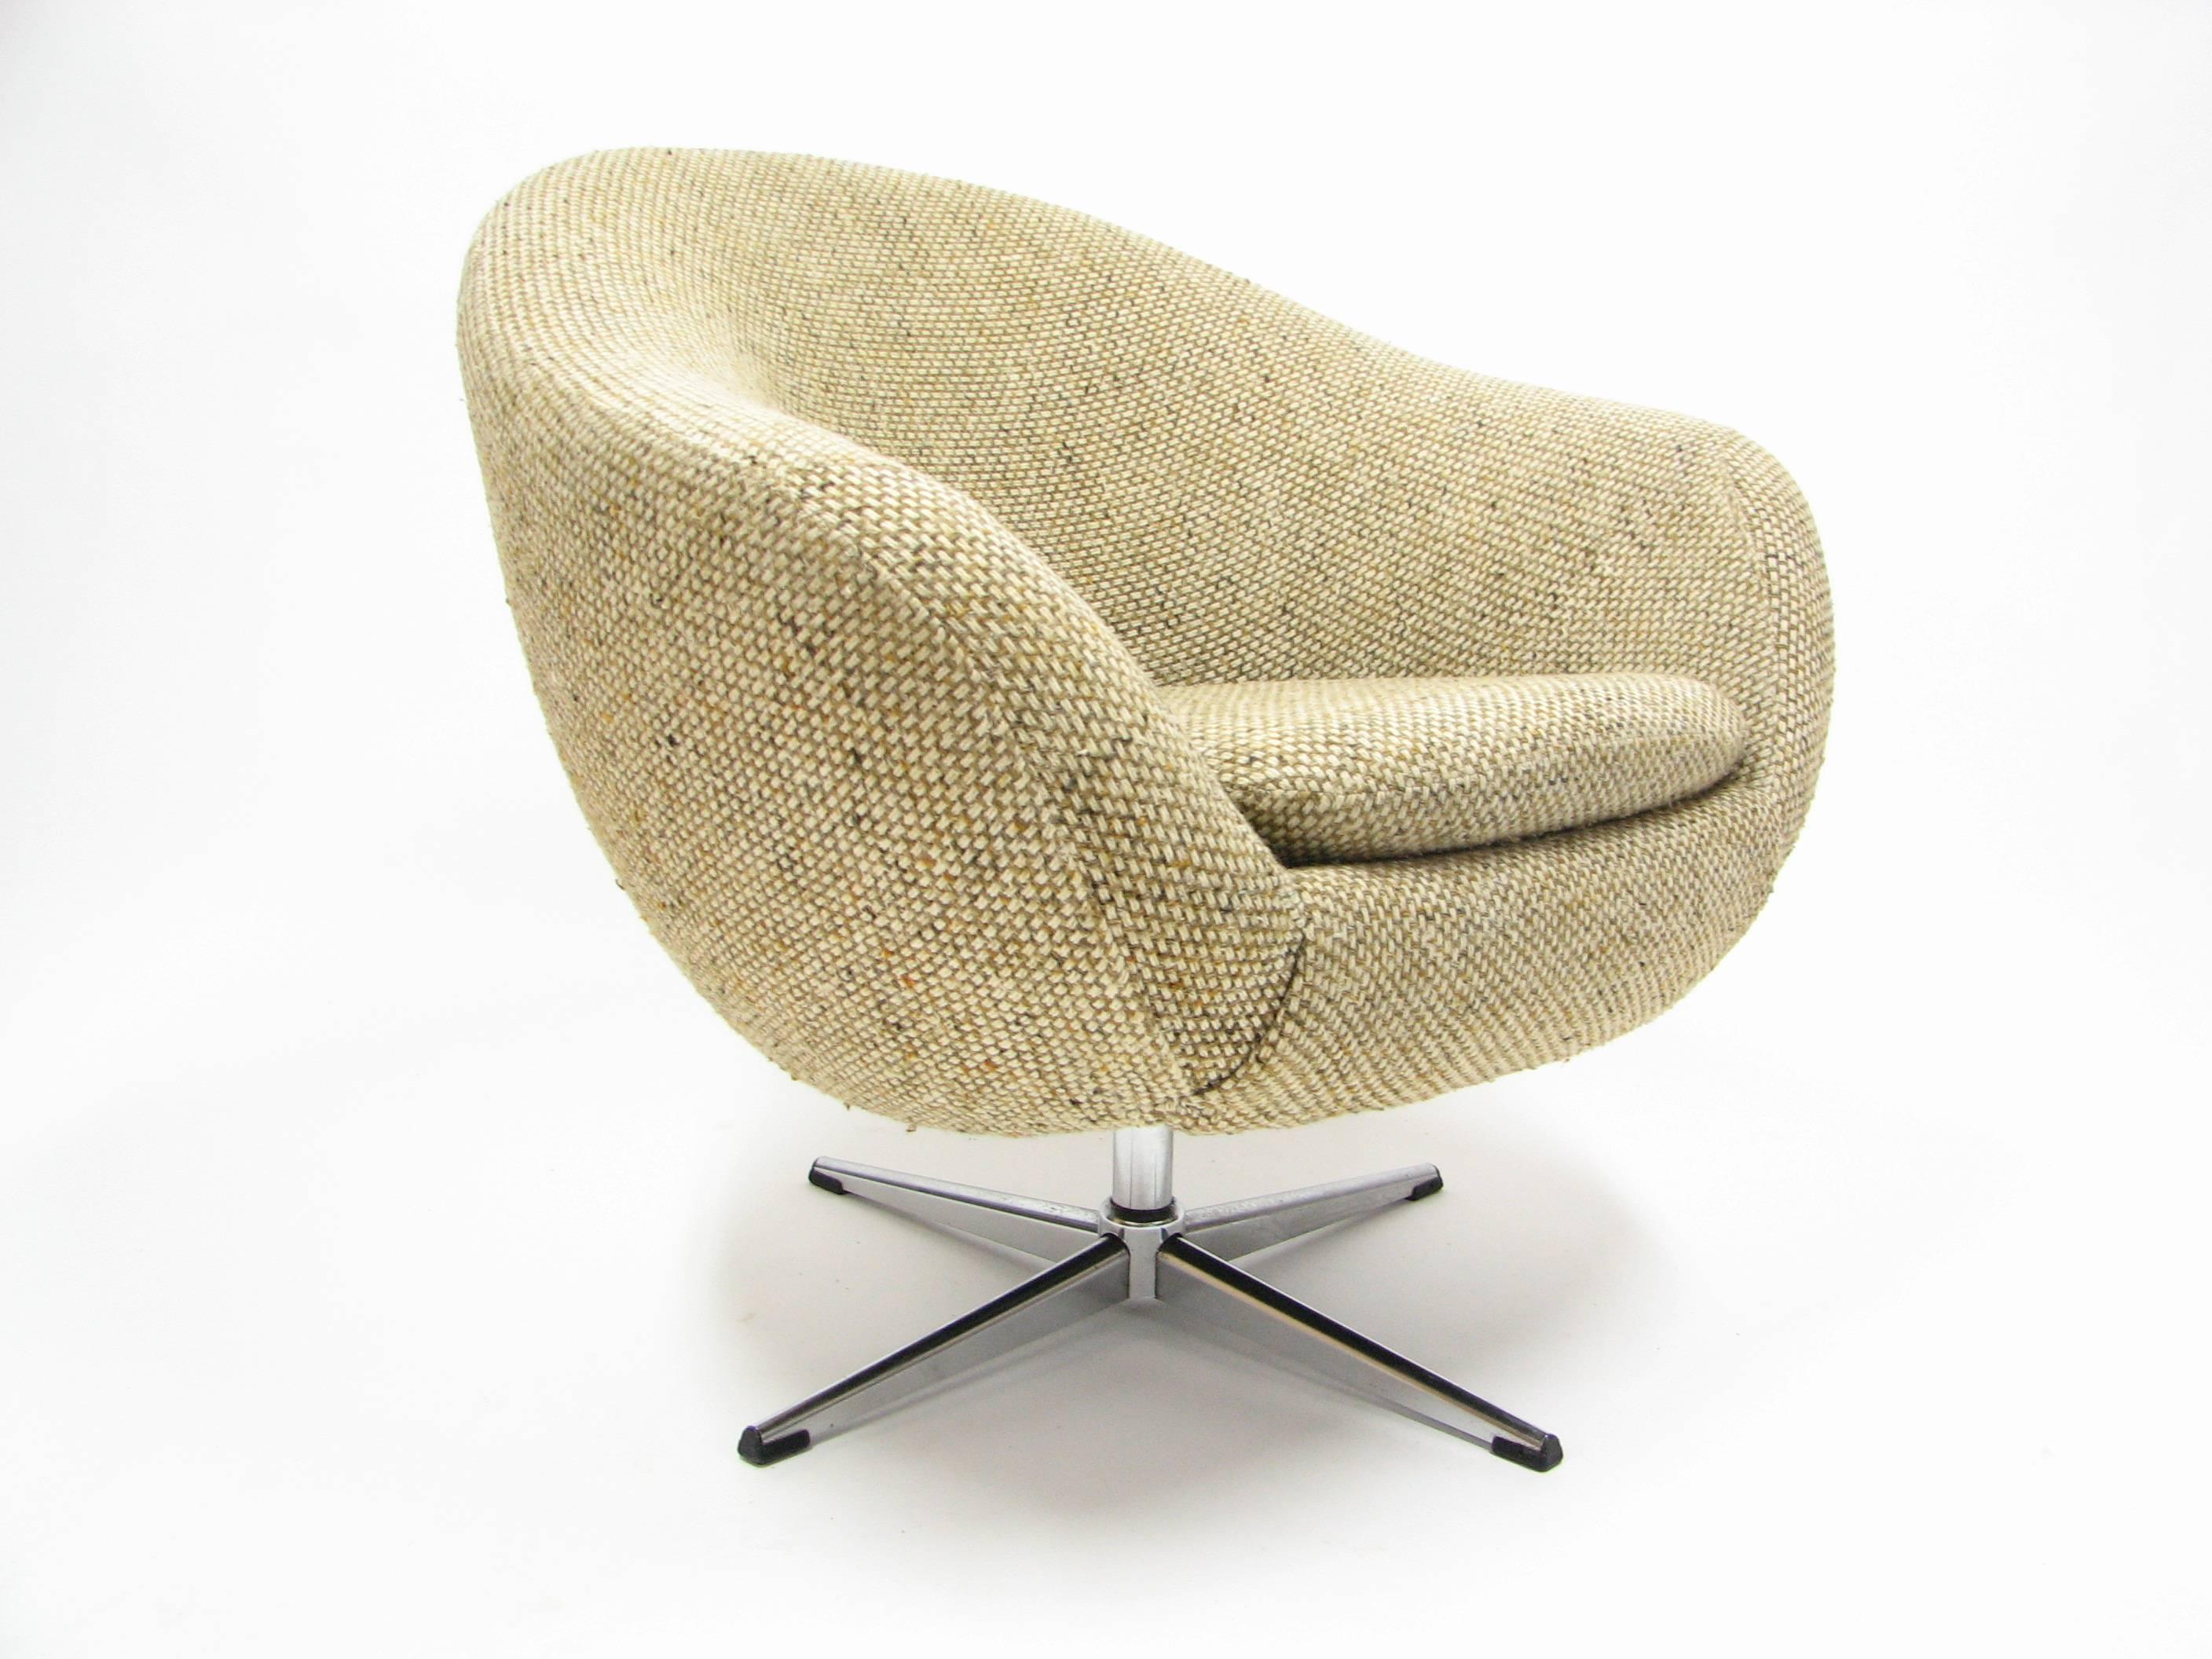 Overman swivel chair in original 1970s tweed fabric.

Remarkable condition for its age. Original owner purchased this chair for her dorm room in the 1970s, and retained possession of it until 2017.

Please note: Pickup for this chair is in Denver,